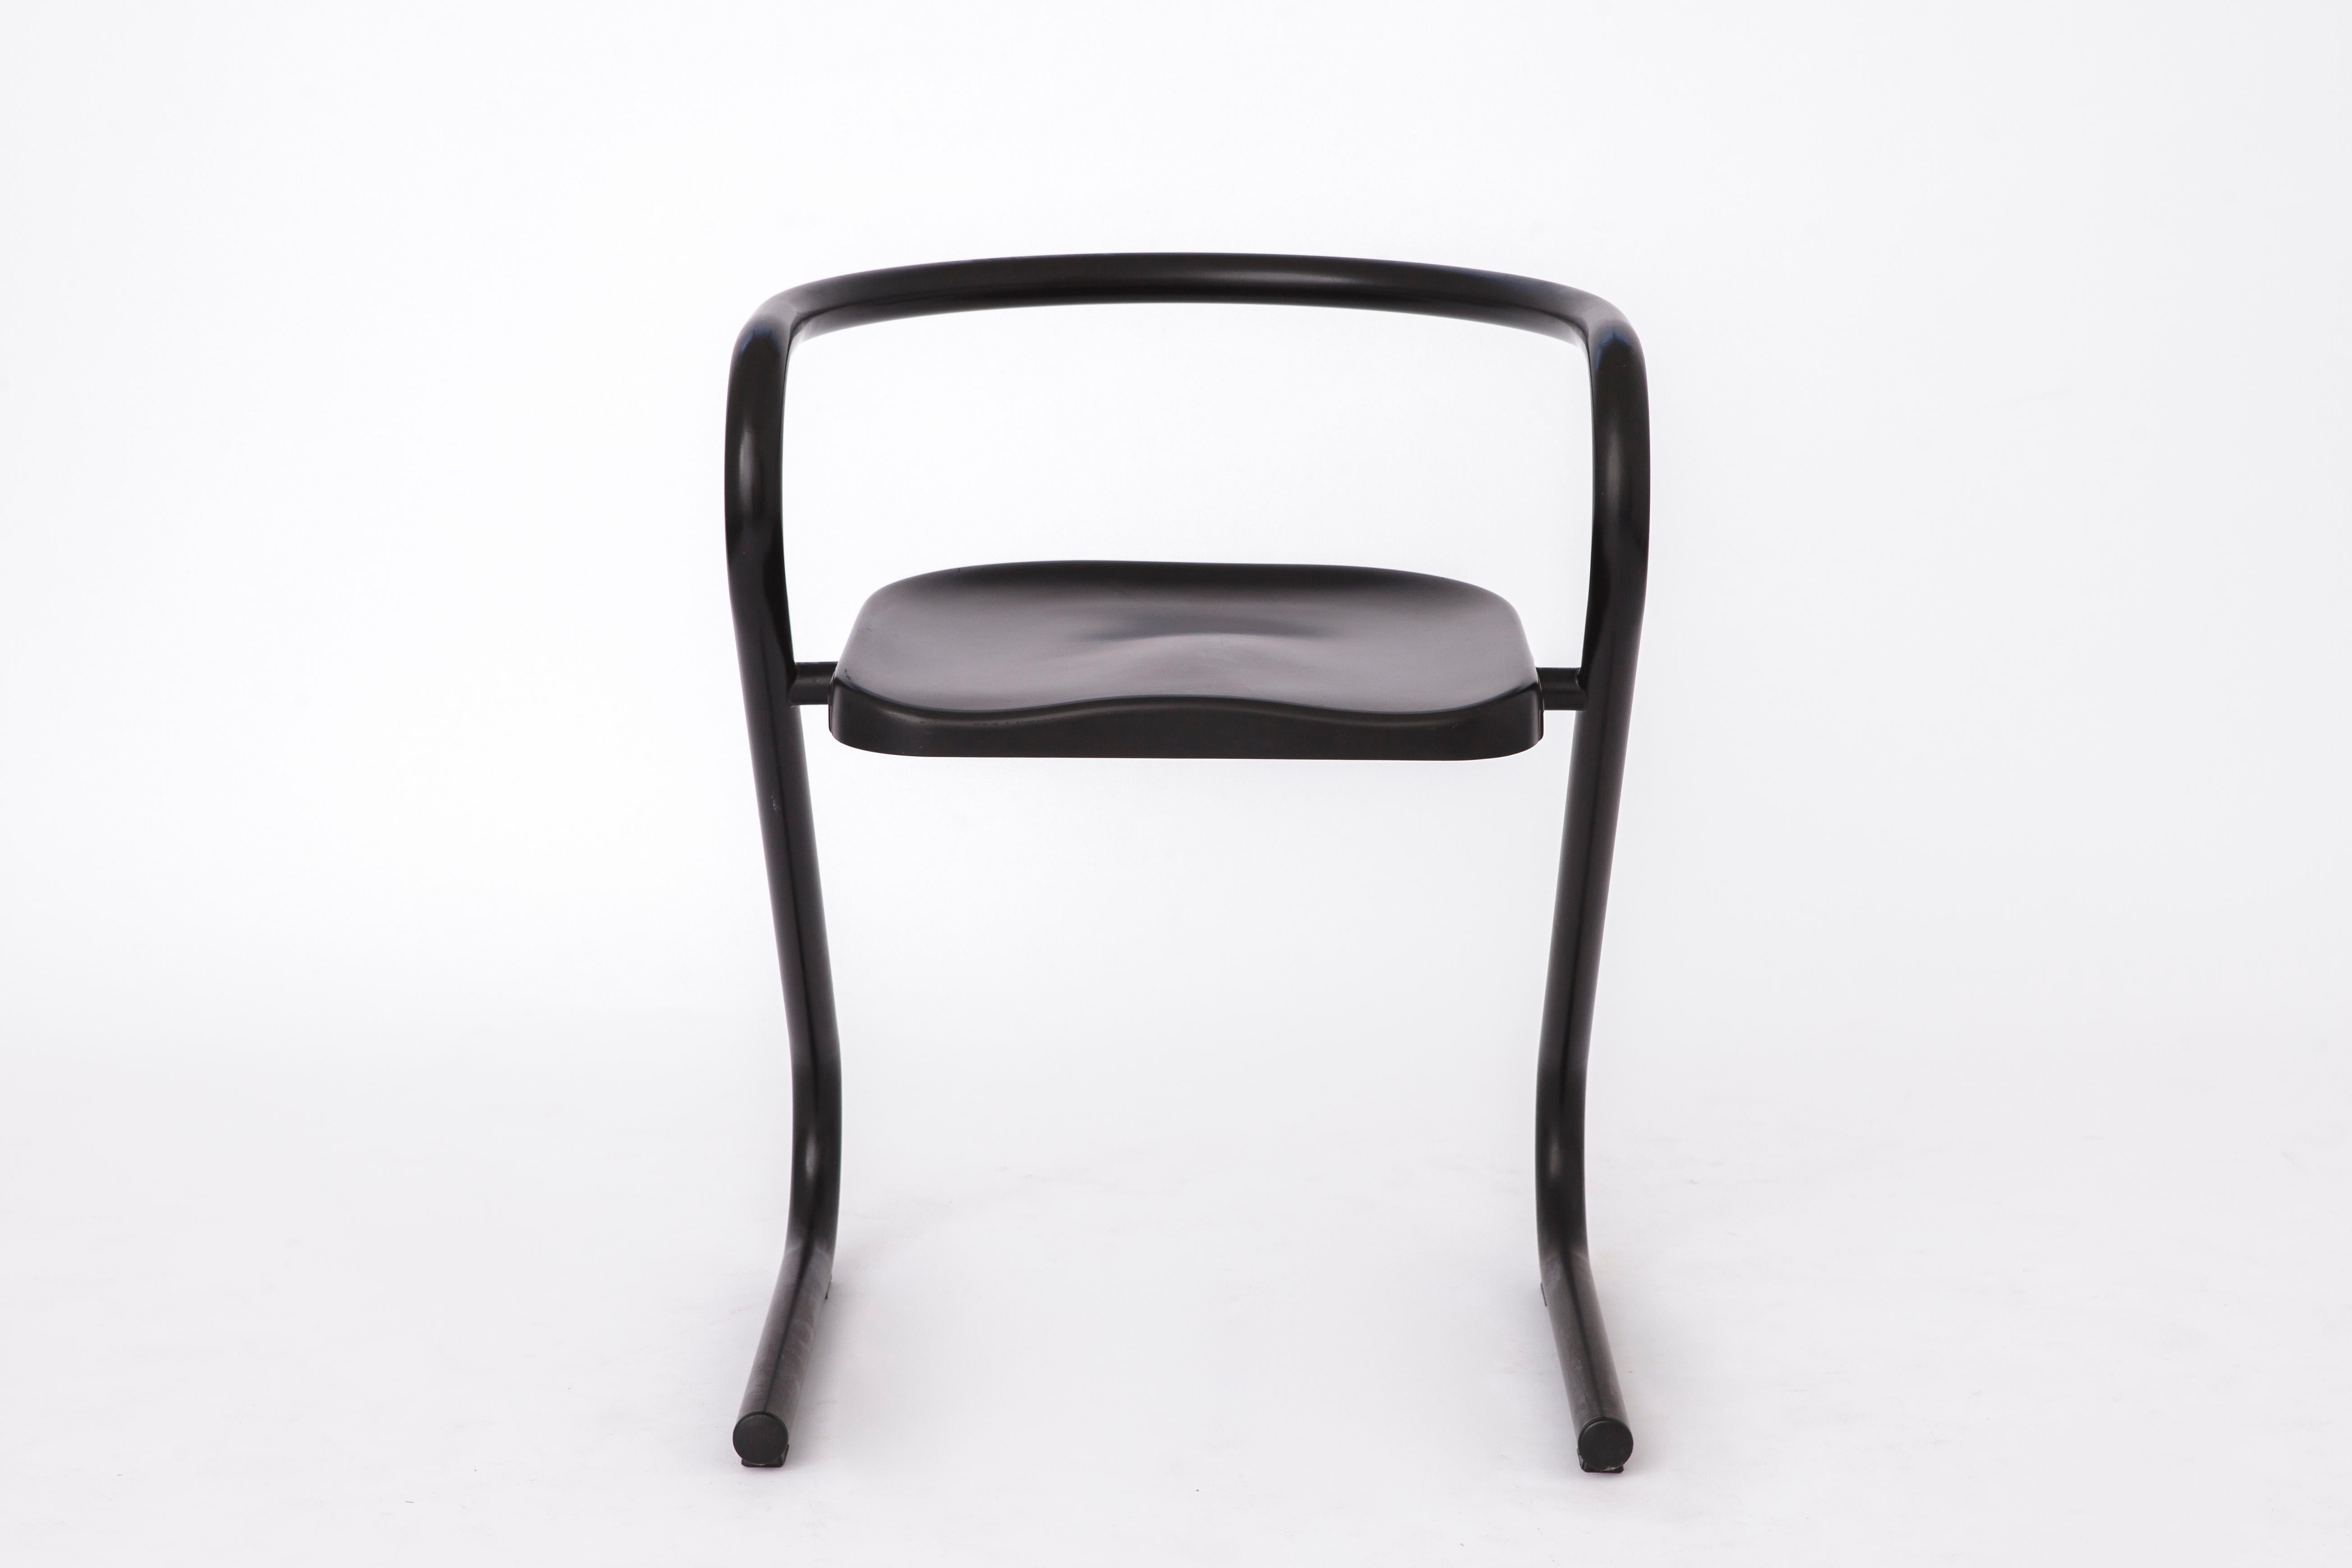 Extravagant chair designed by Börge Lindau for manufacturer Lammhults, Sweden. 
Production period: 1960s. 
Excellent as a dining room or desk chair. 
Just 1 available. 

Metal frame & black plastic seat. 
Very good vintage condition. 
Manufacturer's